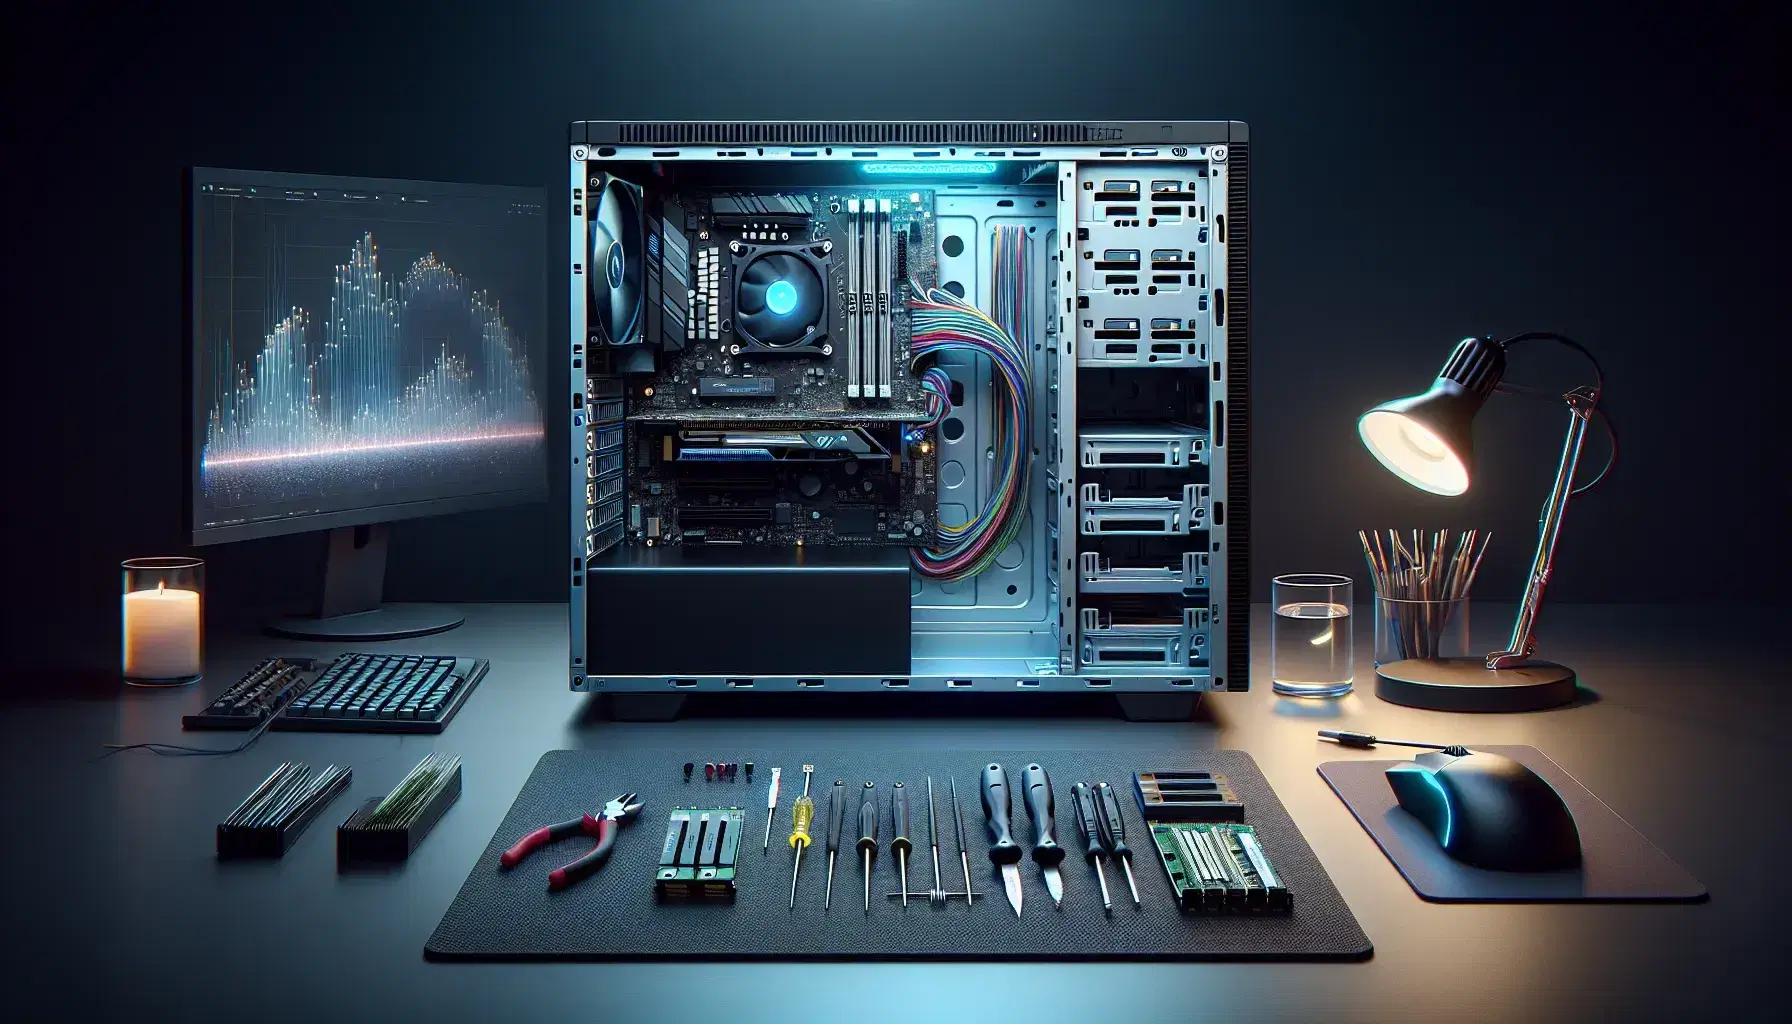 Workspace of a computer technician with open computer and internal components illuminated by blue LEDs, tool kit and external hard drives.